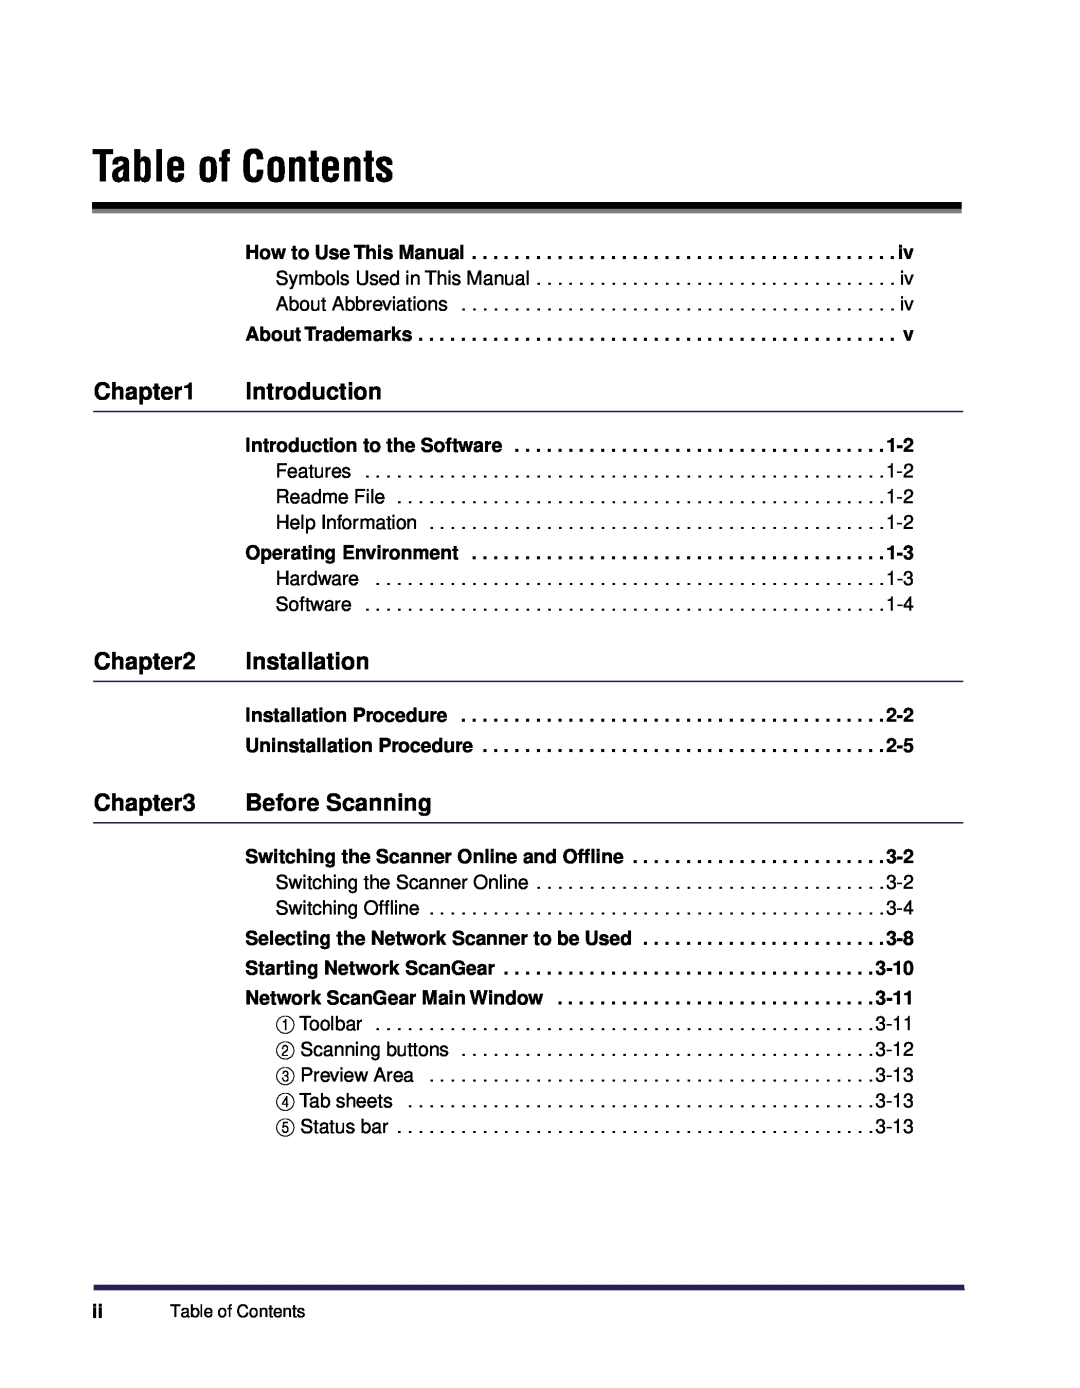 Canon iR Series Table of Contents, Introduction, Installation, Before Scanning, How to Use This Manual, About Trademarks 